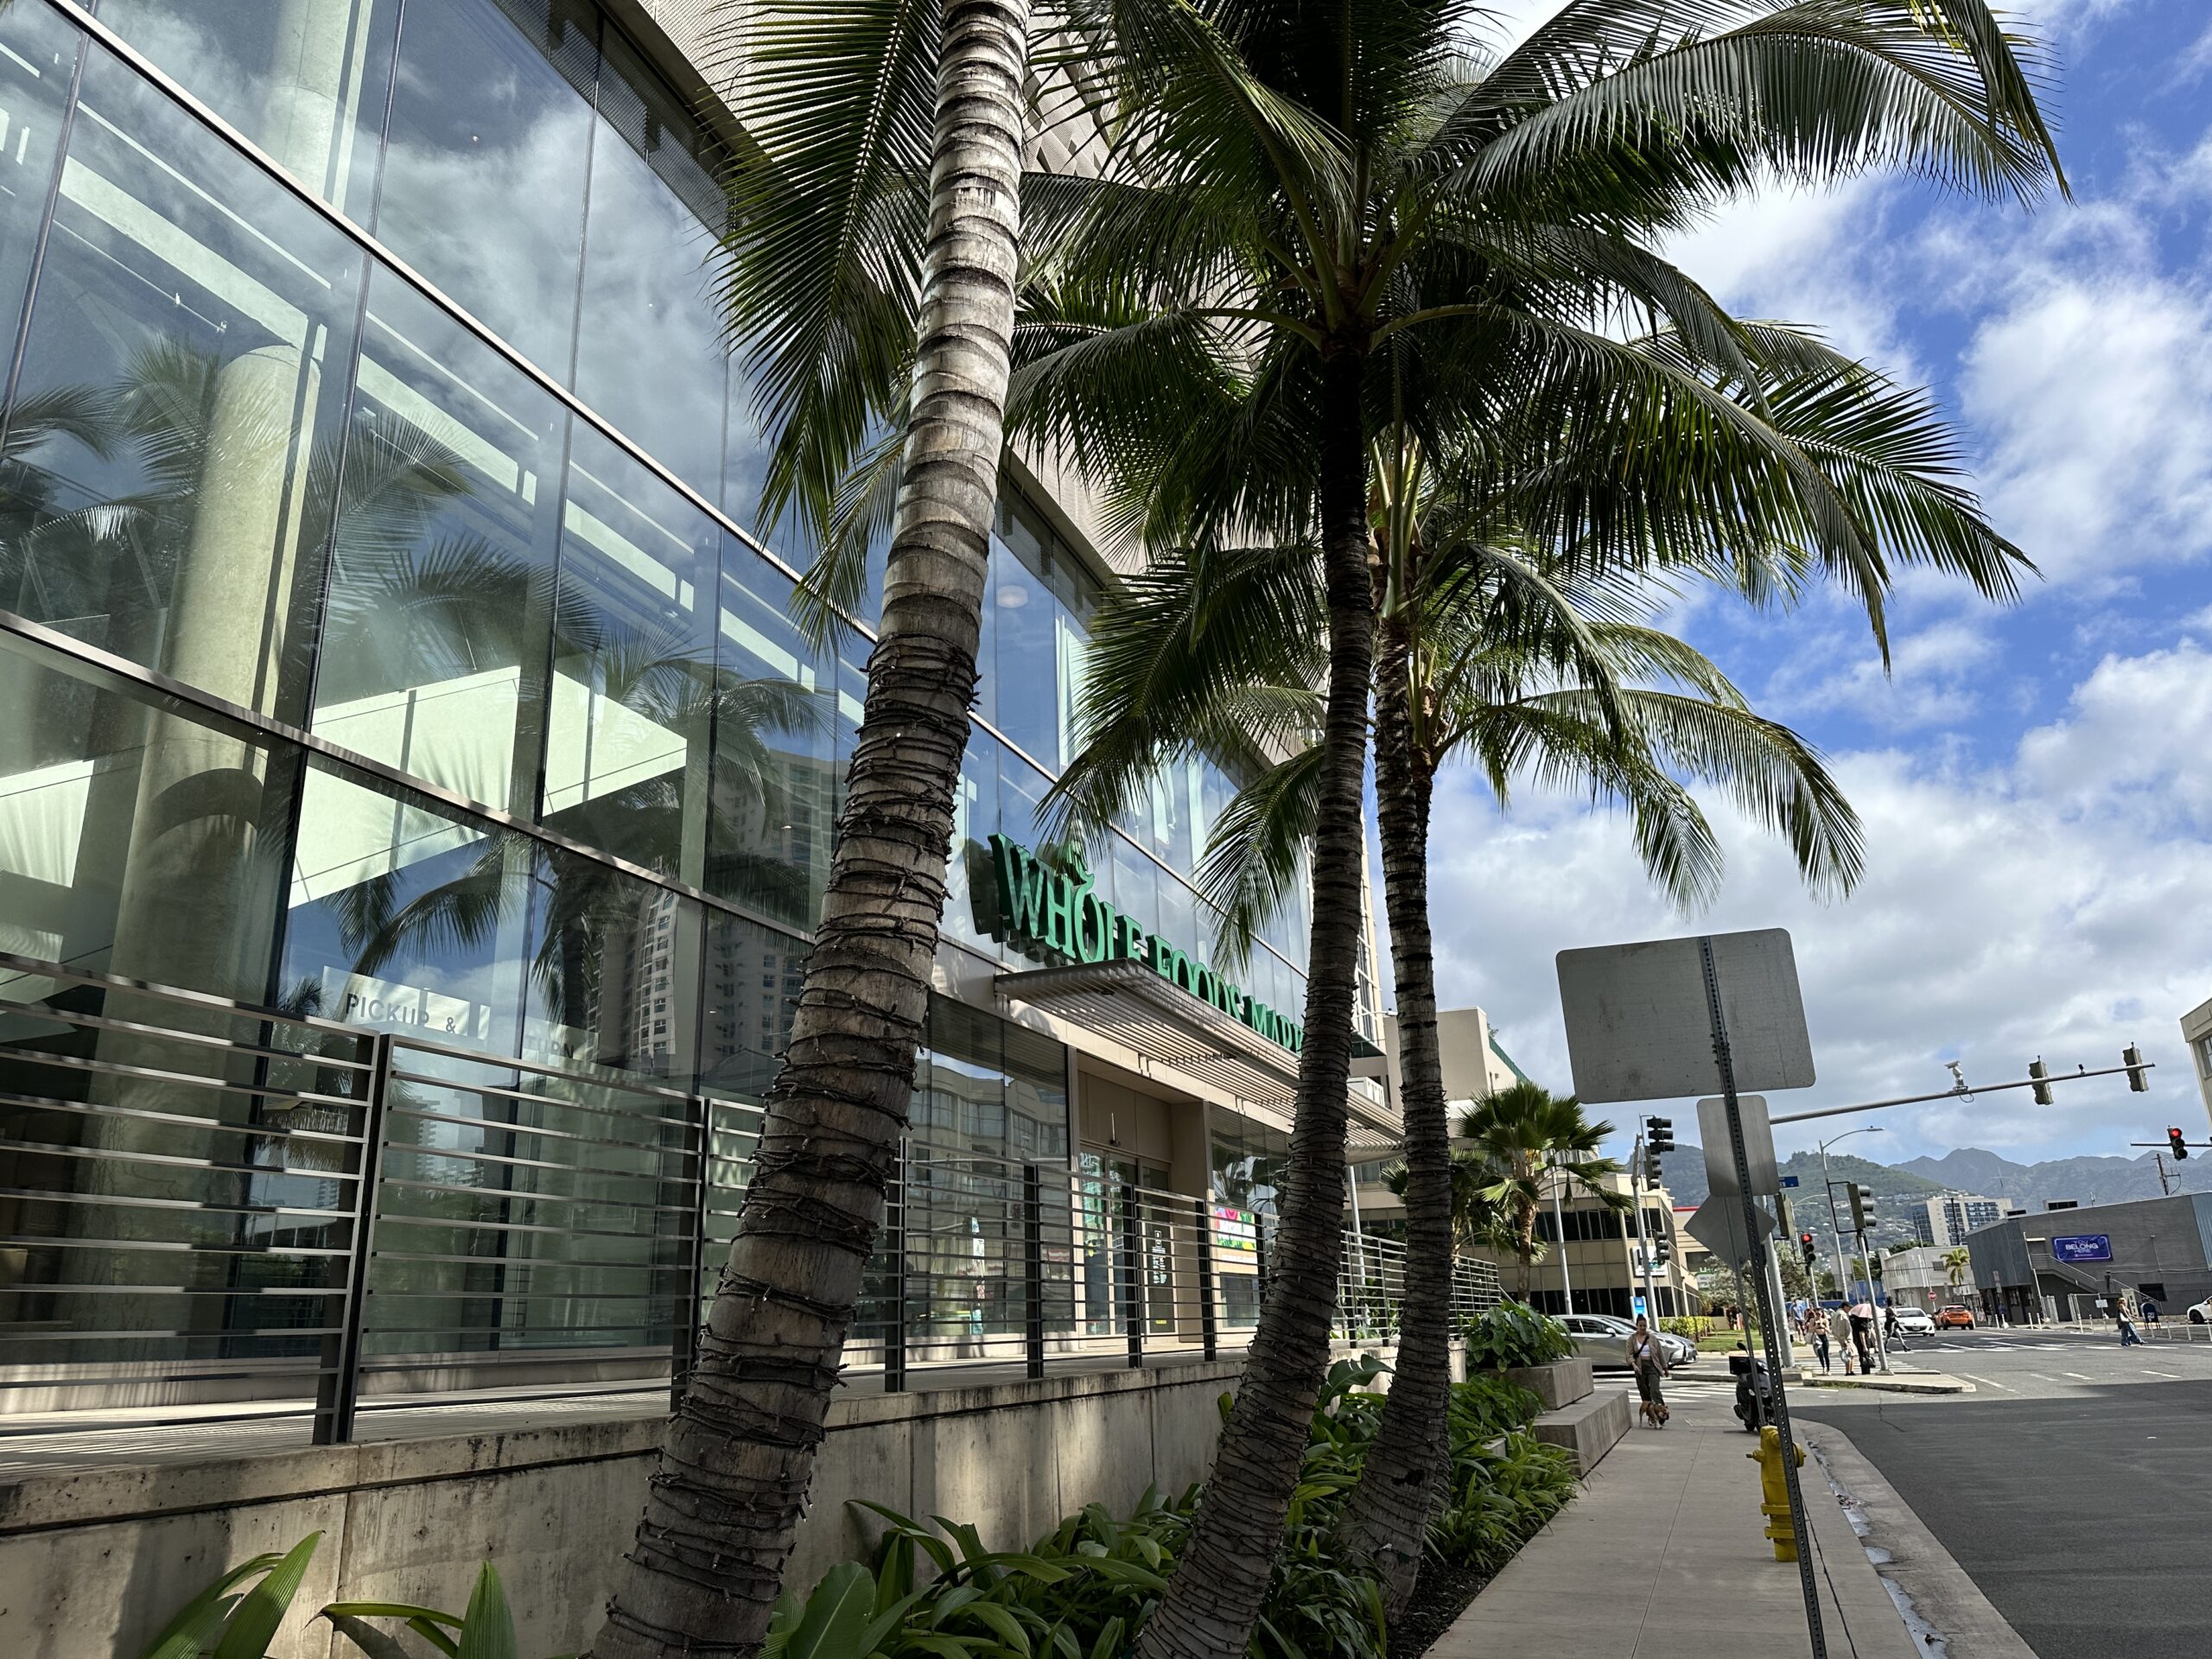 Read more about the article Whole Foods Market in Hawaii and the Waikiki Turtle Trolley Experience!